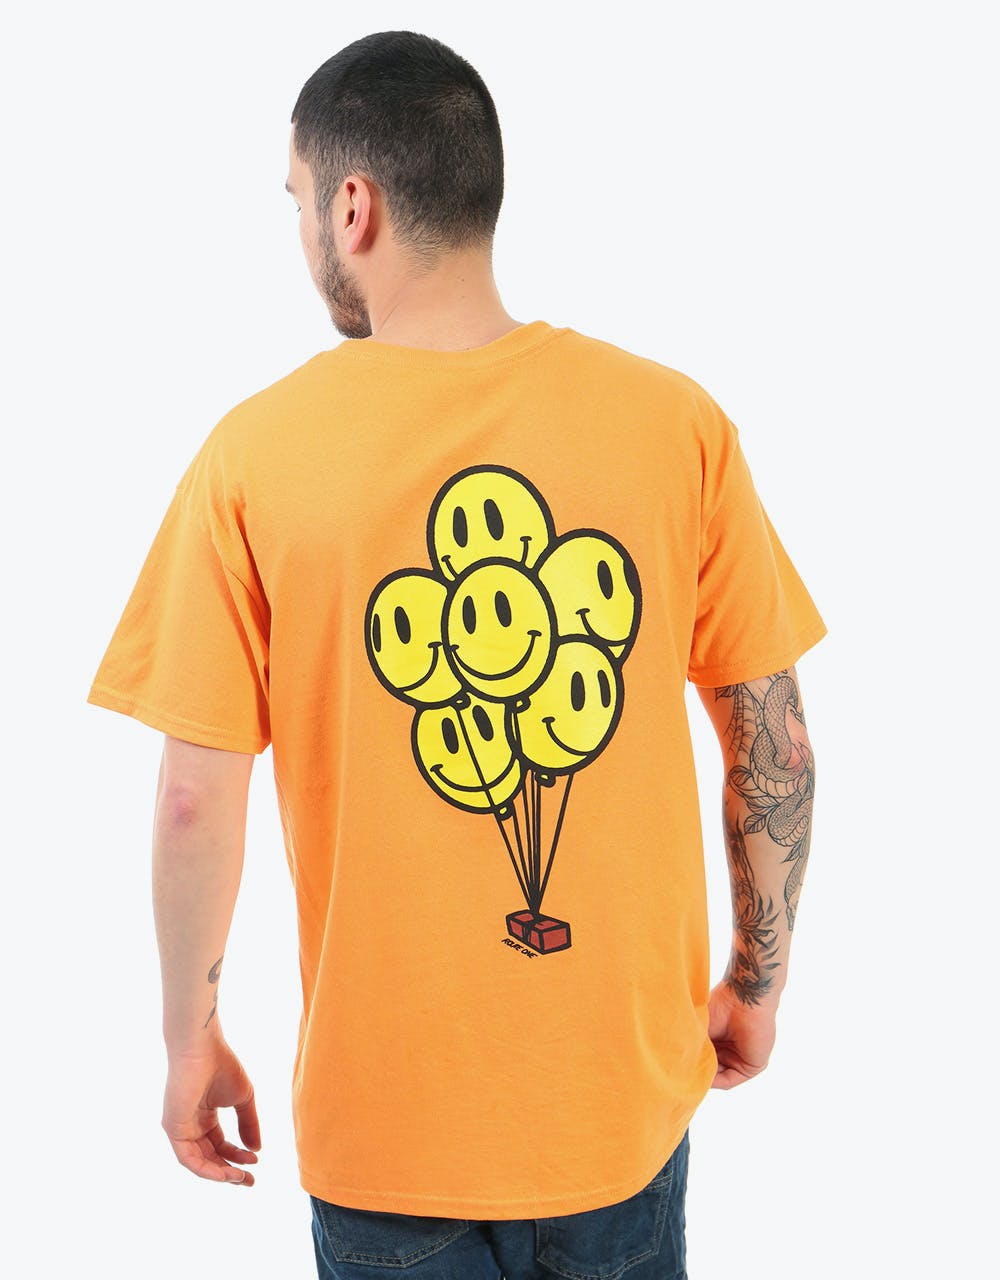 Route One Happy T-Shirt - Tangerine